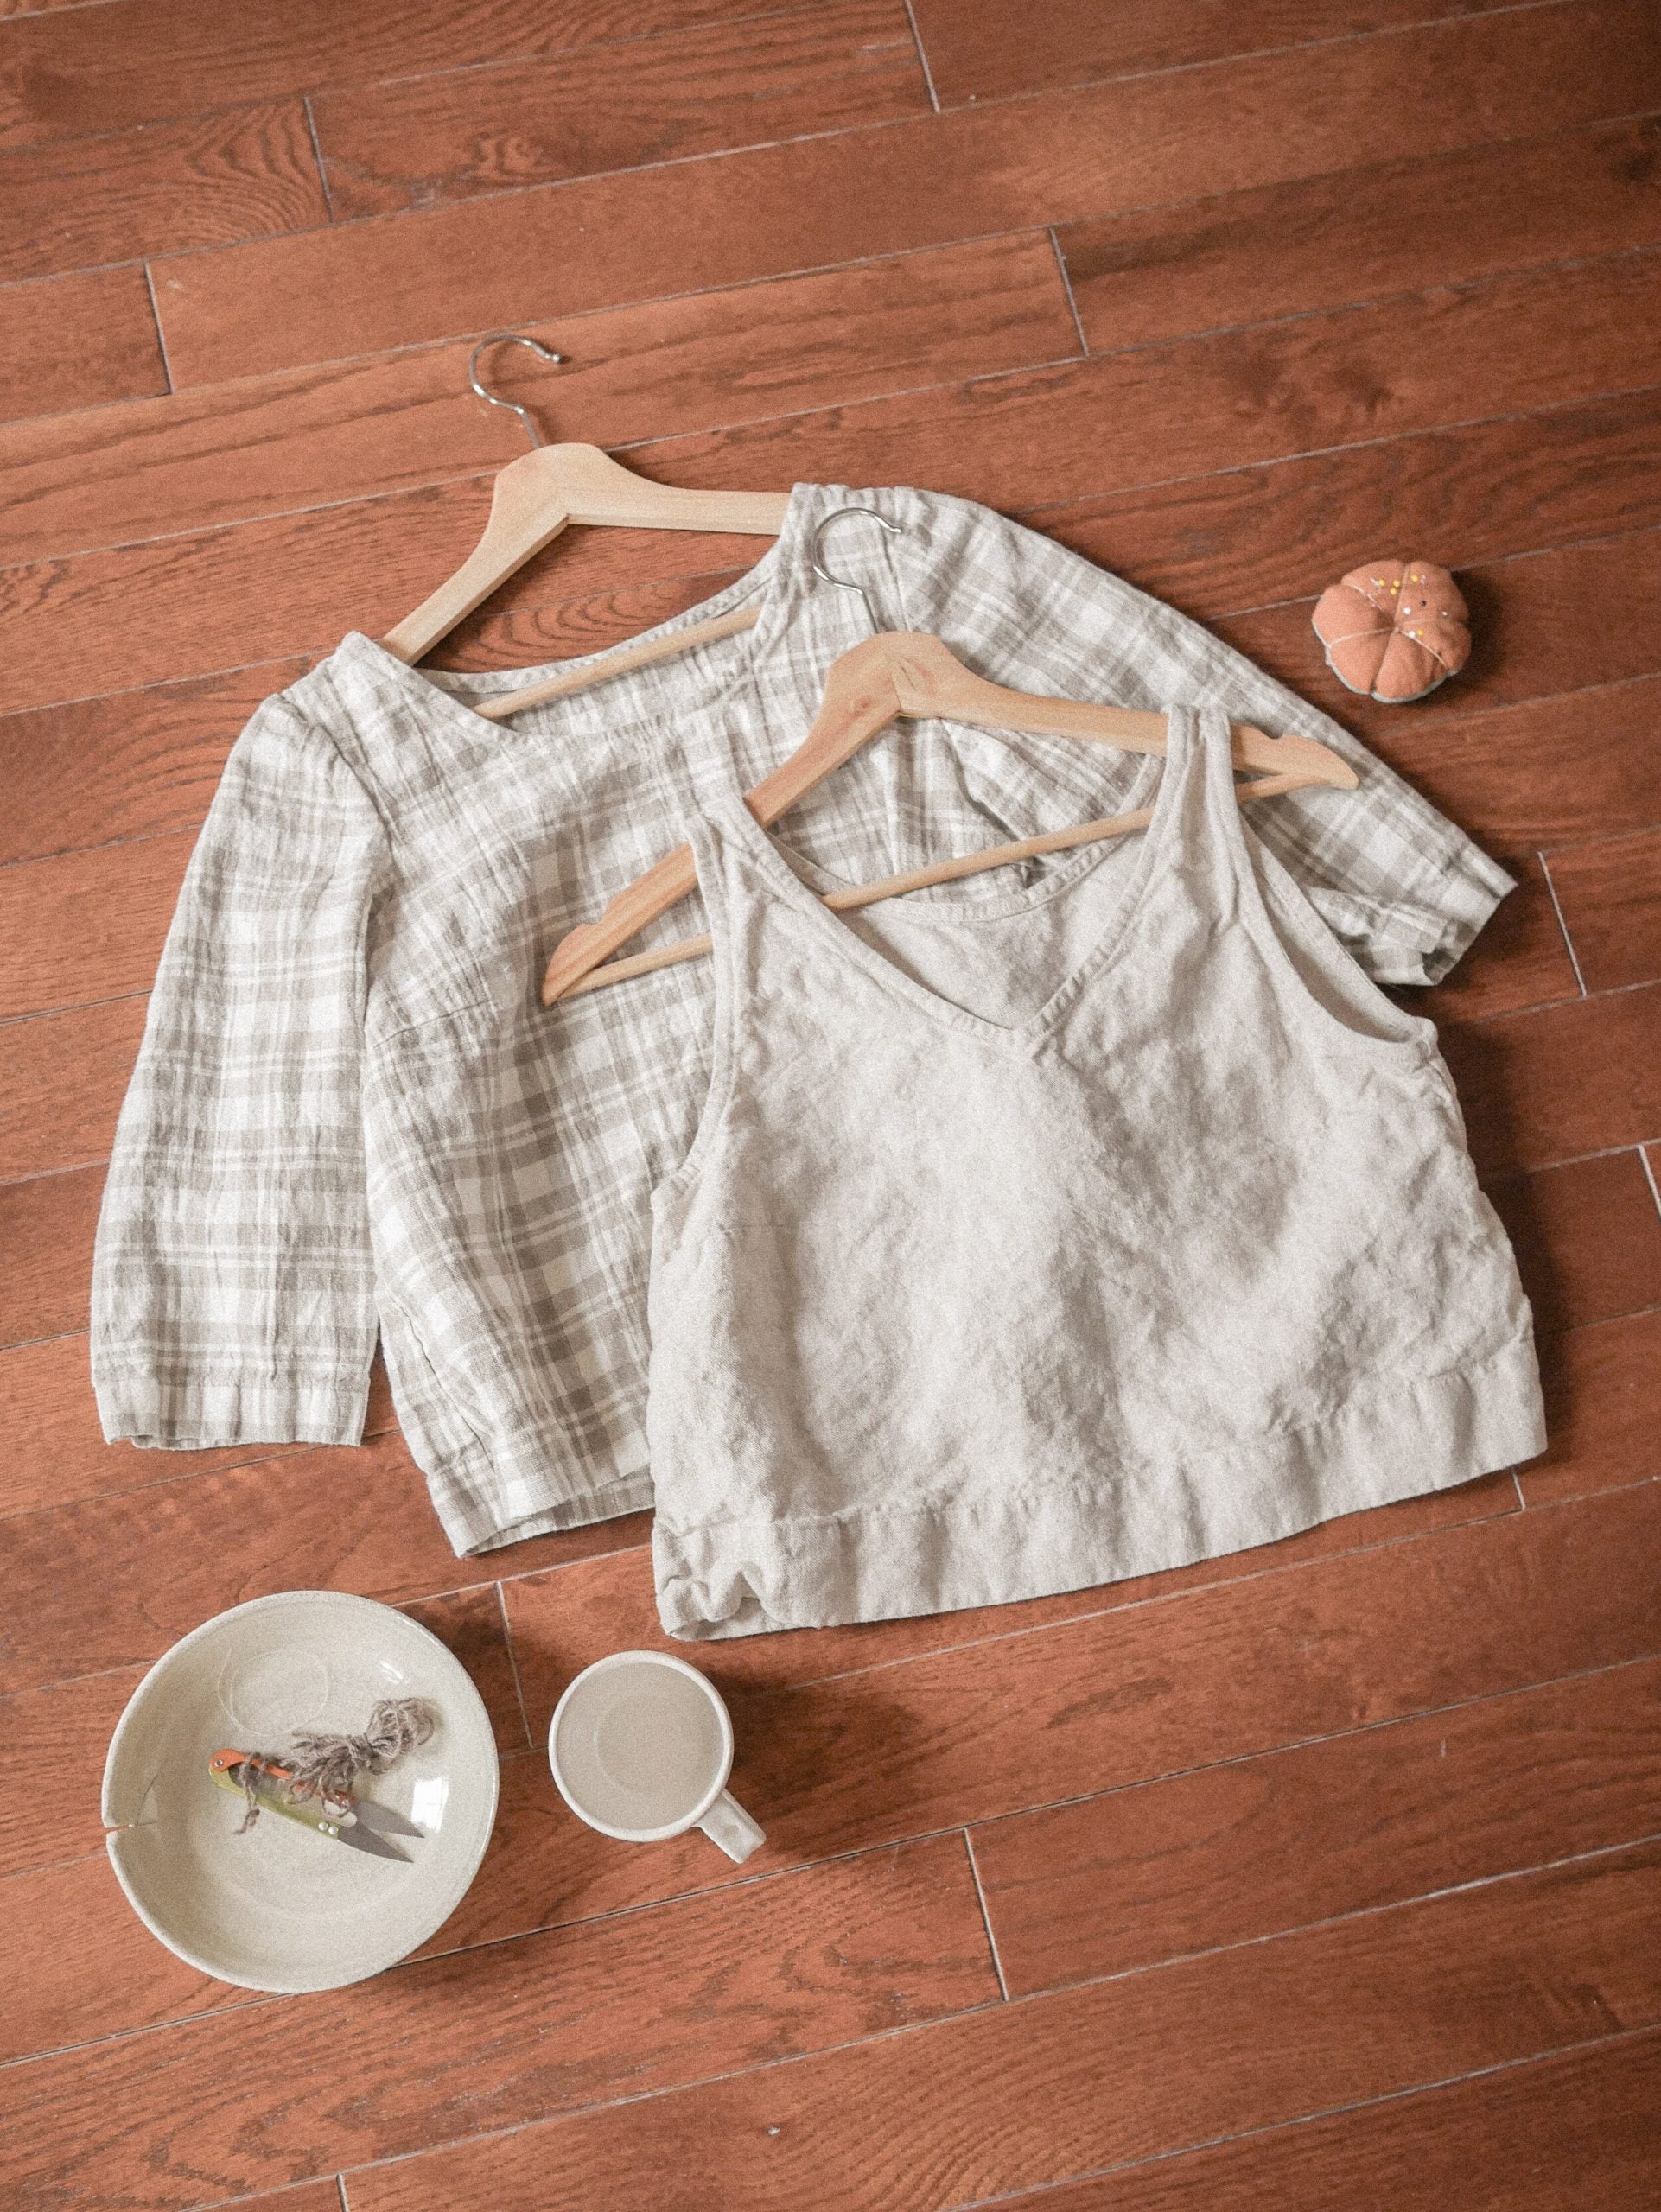 Photo of the Laurence Top sewing pattern from Vivian Shao Chen on The Fold Line. A top pattern made in linen or cotton fabric, featuring a v-neck sleeveless option and a scoop neck 3/4 sleeve option, both with a cropped length.